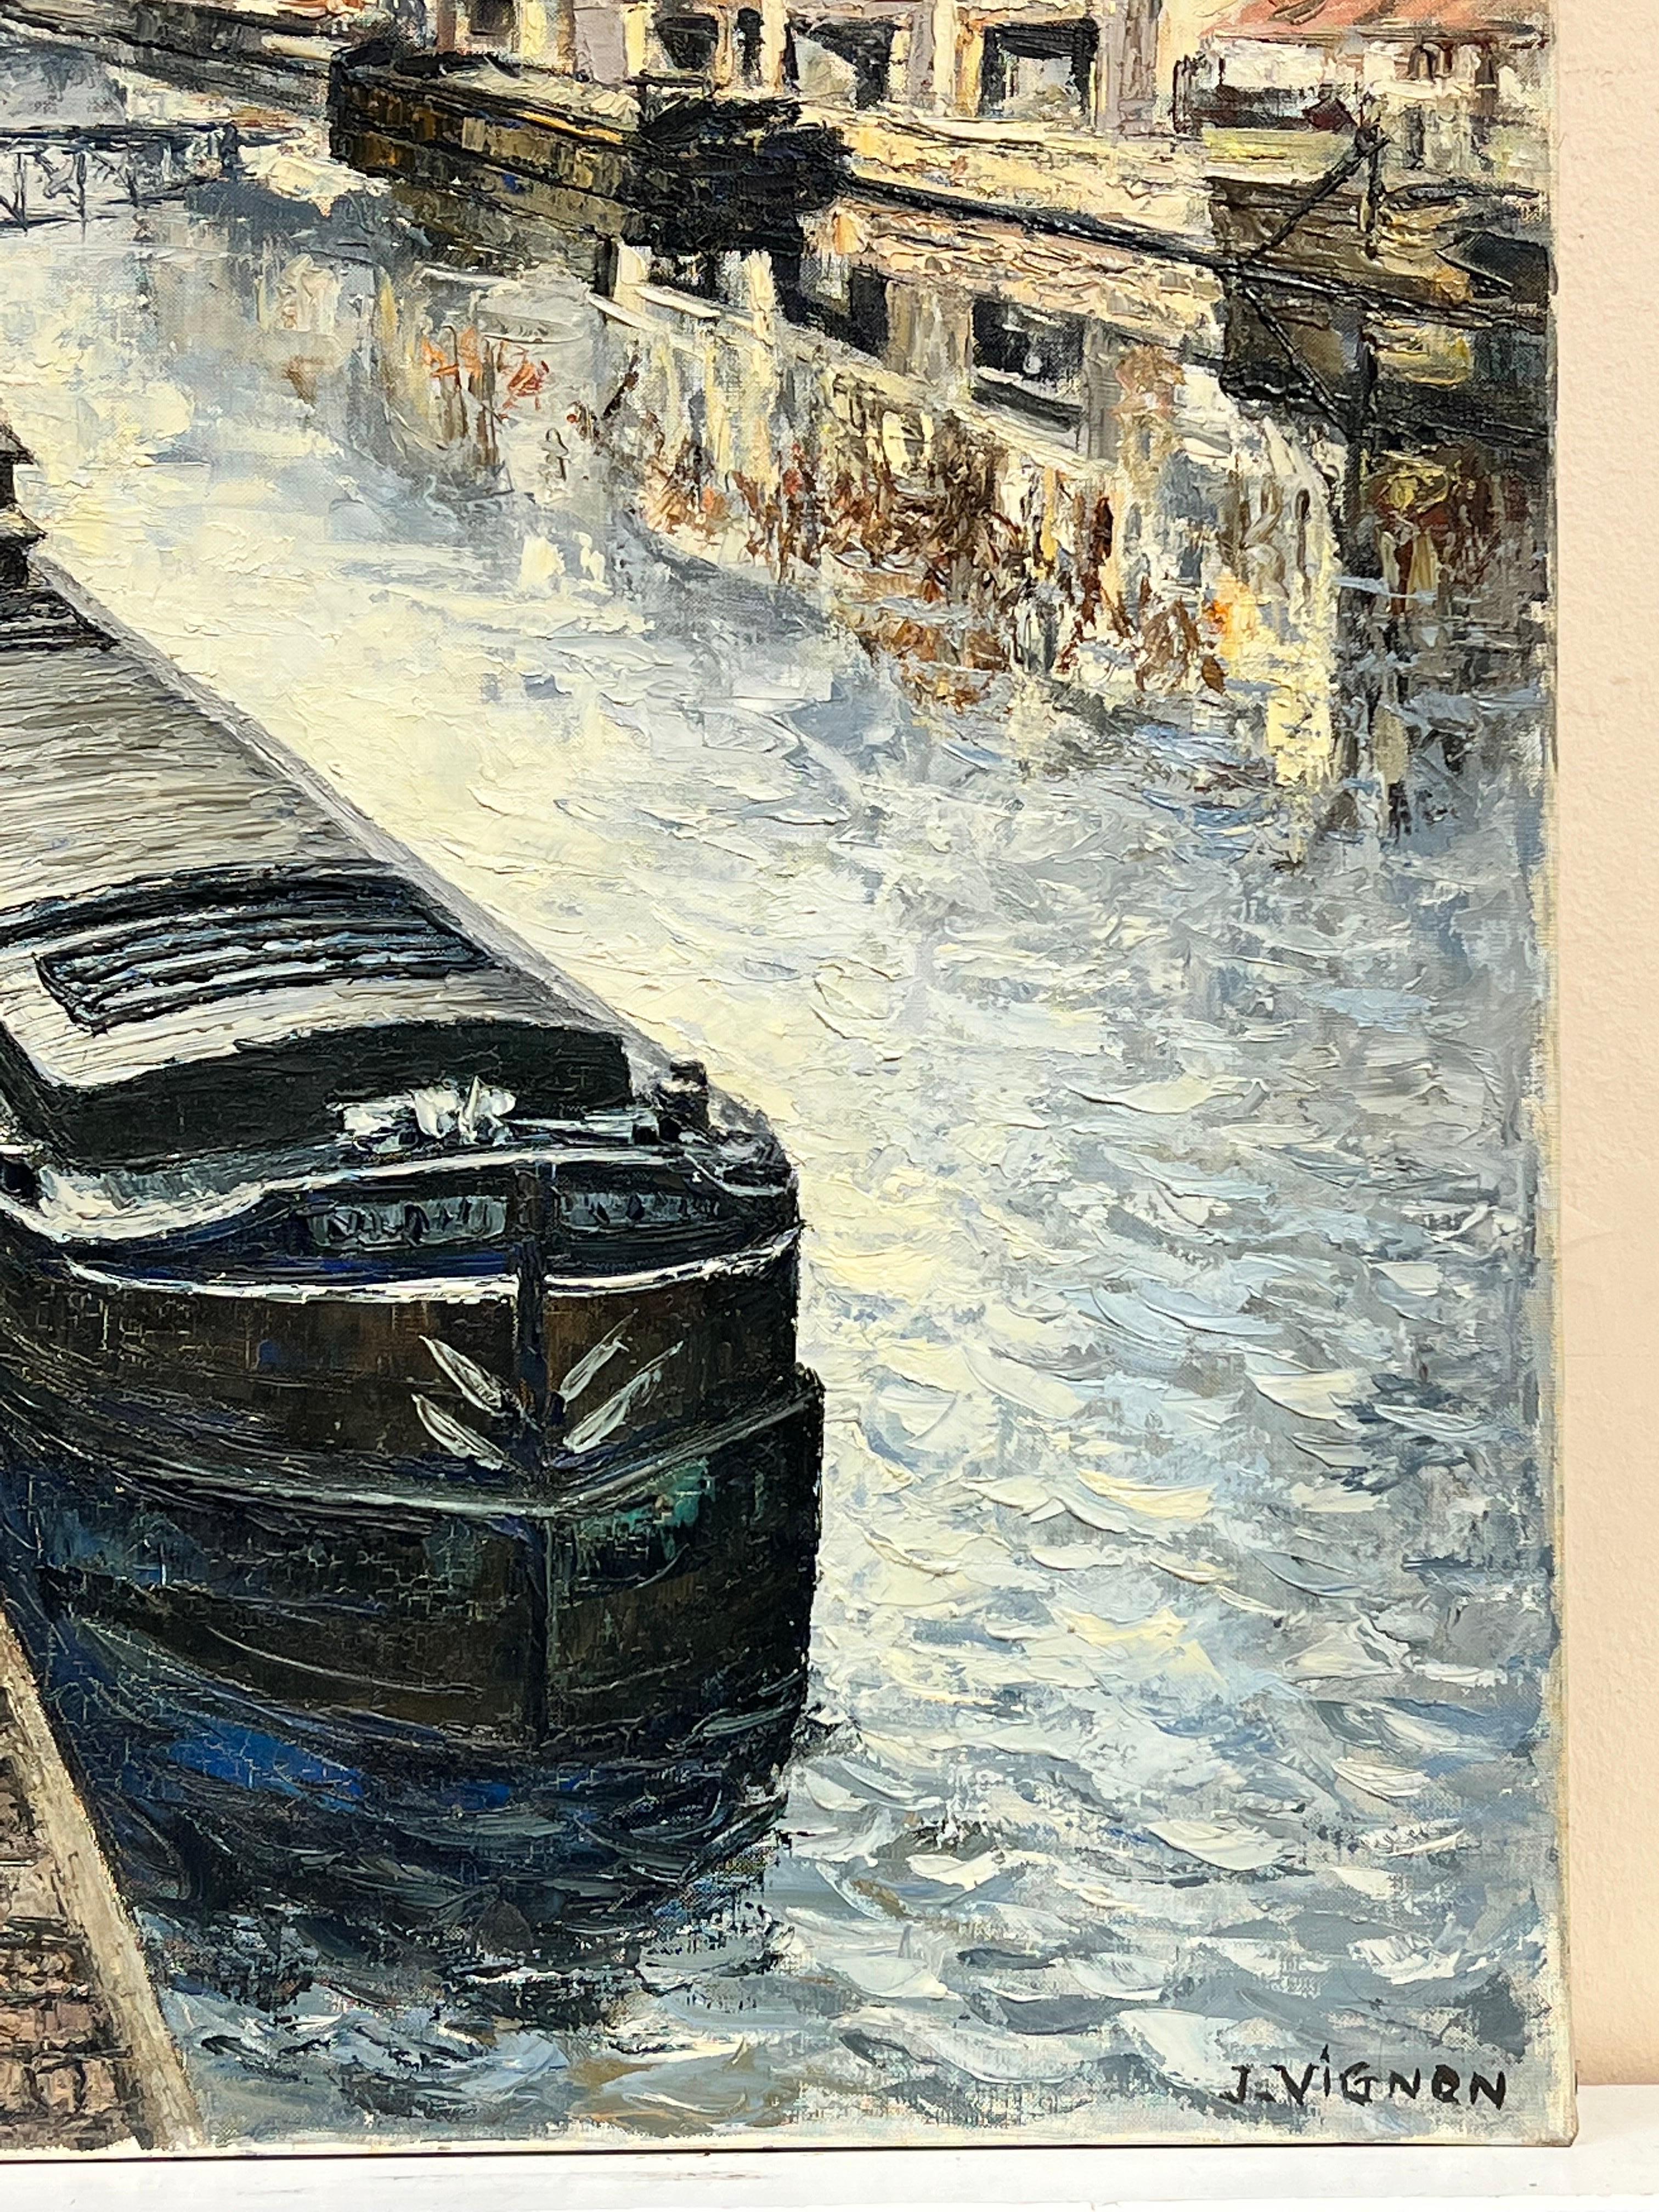 The River Seine, Paris
by Josine Vignon (French 1922-2022)
signed 
oil painting on canvas, unframed
canvas: 37 x 29 inches

Colors: Blue, brown , white and grey

Very good condition

Provenance: from the artists estate, France

Josine Vignon